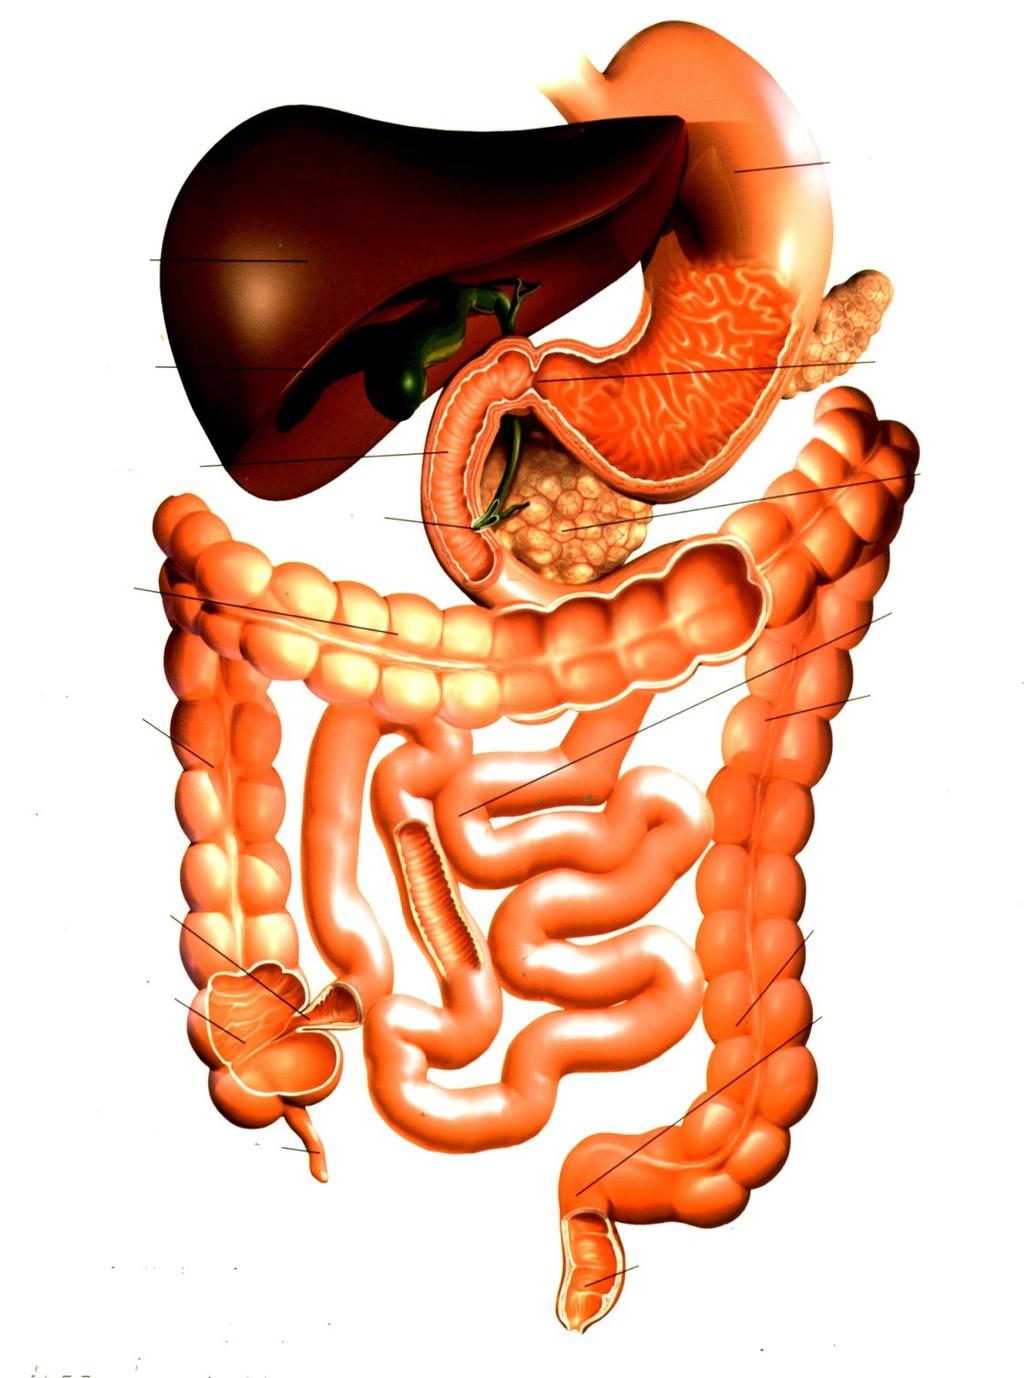 10 Gallbladder Duodenum Transverse colon Ileum Anatomy of the Digestive Tract Stomach Liver Ascending